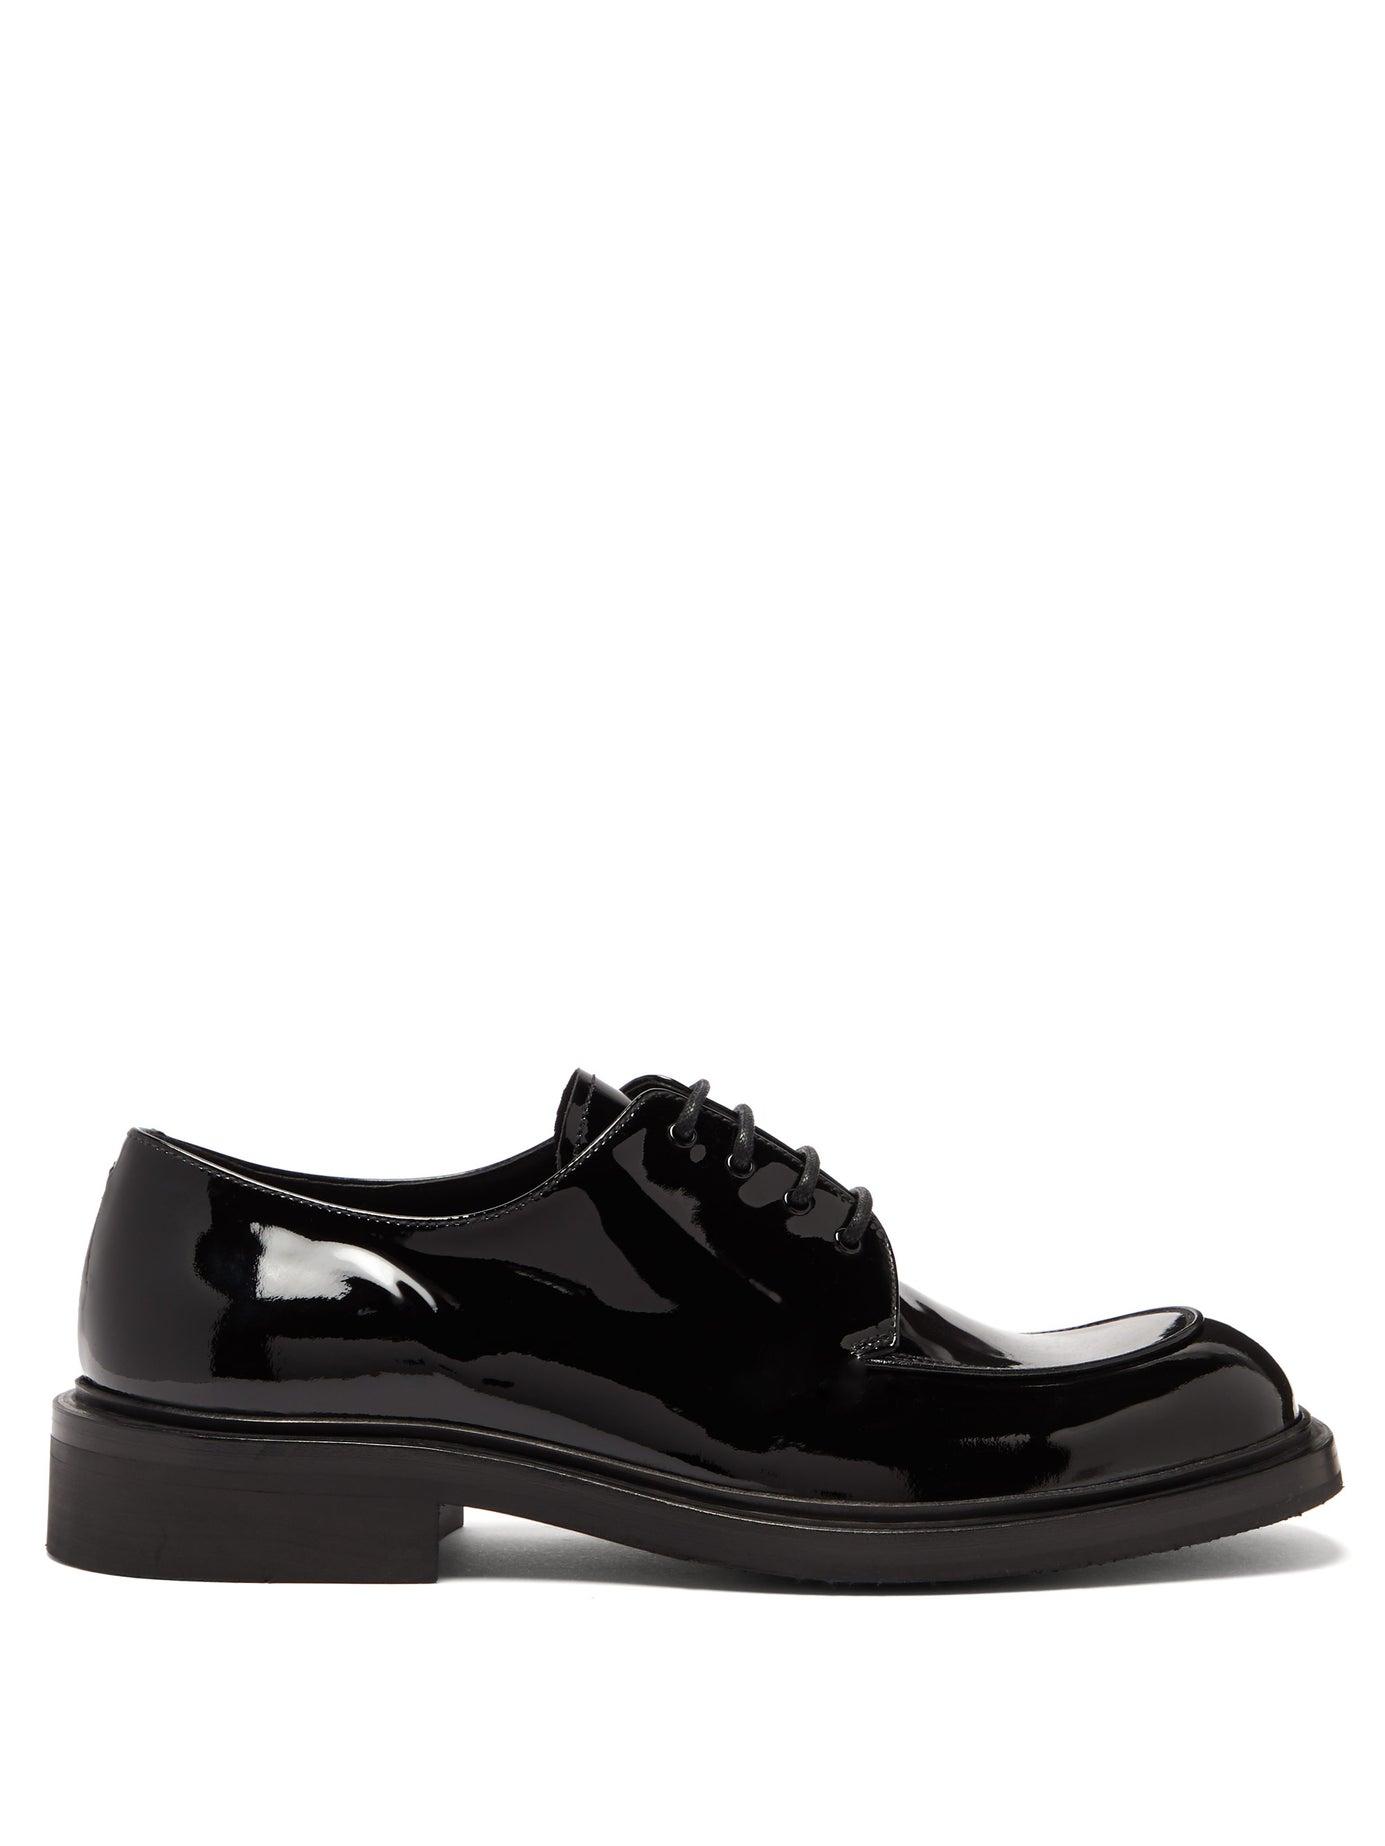 Prada Square-toe Patent-leather Derby Shoes in Black for Men | Lyst